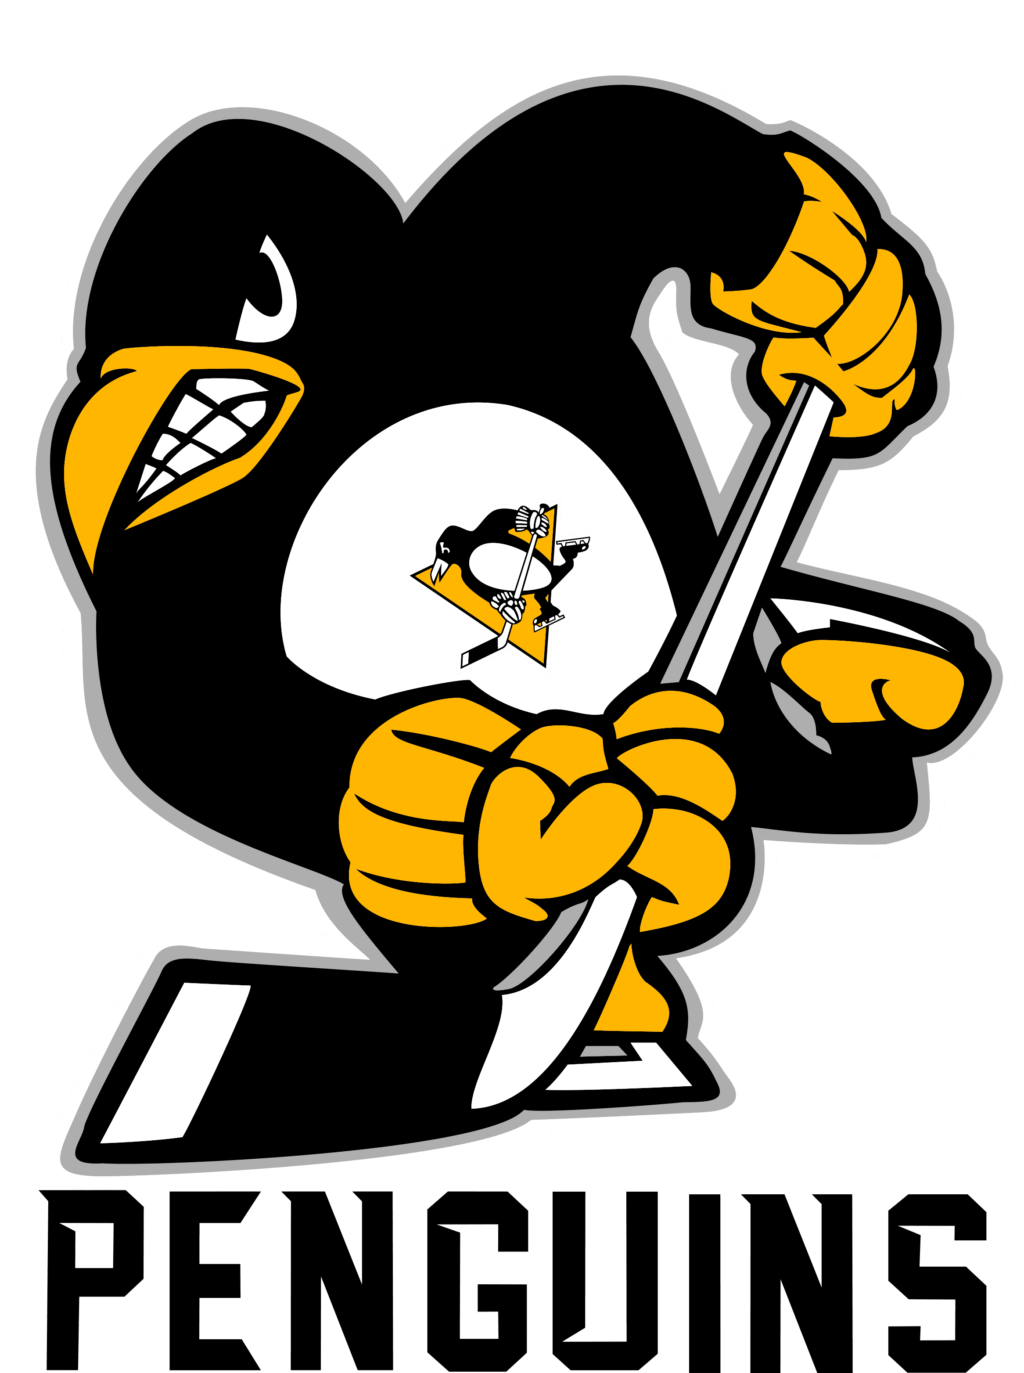 pp 10 NHL Pittsburgh Penguins, Pittsburgh Penguins SVG Vector, Pittsburgh Penguins Clipart, Pittsburgh Penguins Ice Hockey Kit SVG, DXF, PNG, EPS Instant download NHL-Files for silhouette, files for clipping.